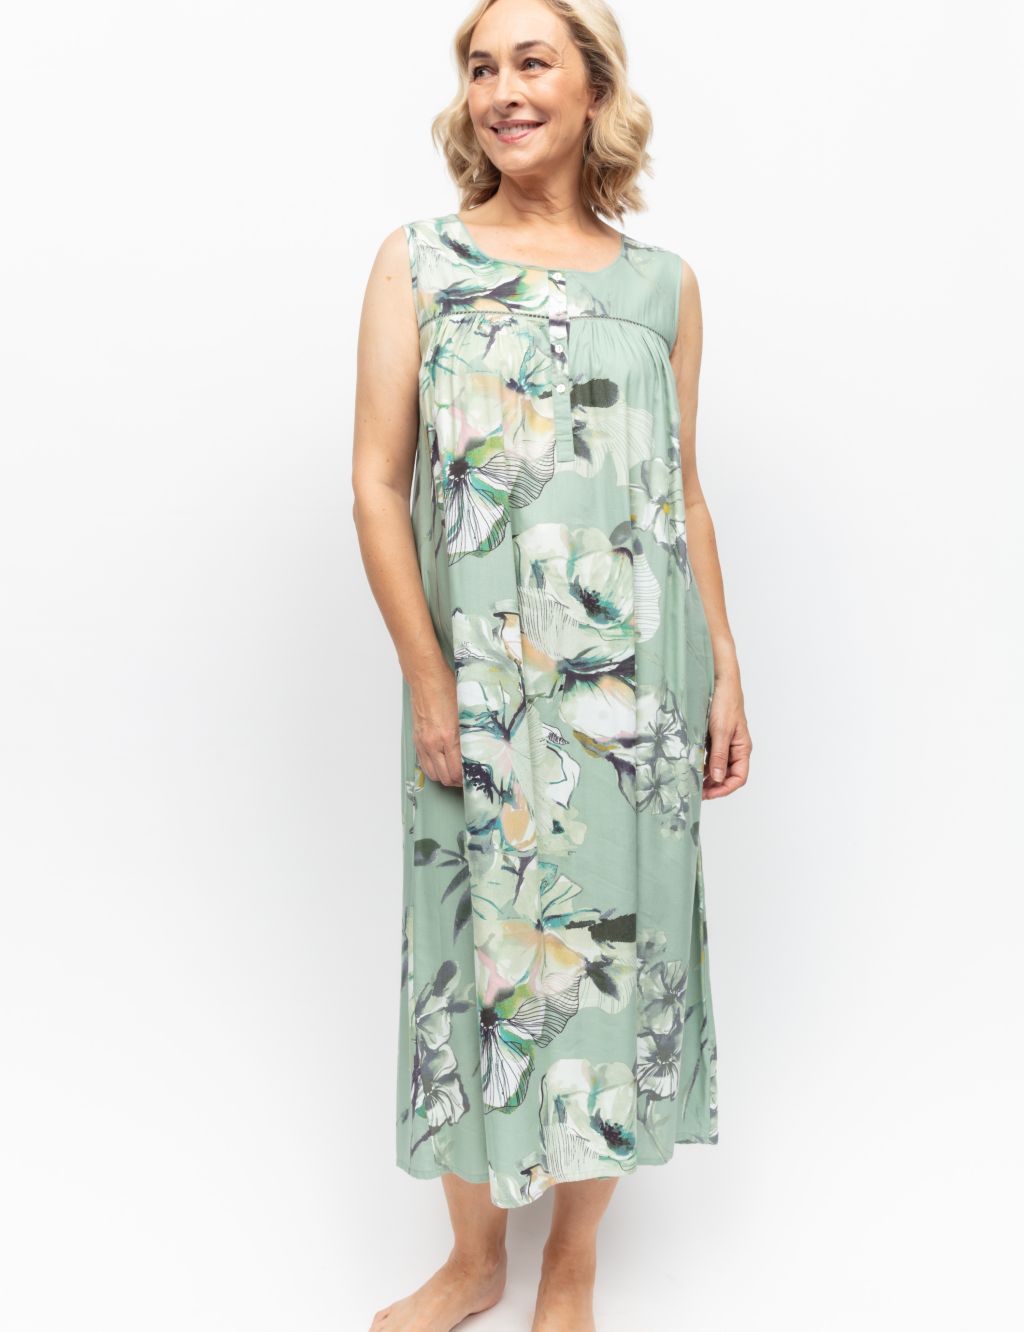 Cotton Modal Floral Nightdress image 1